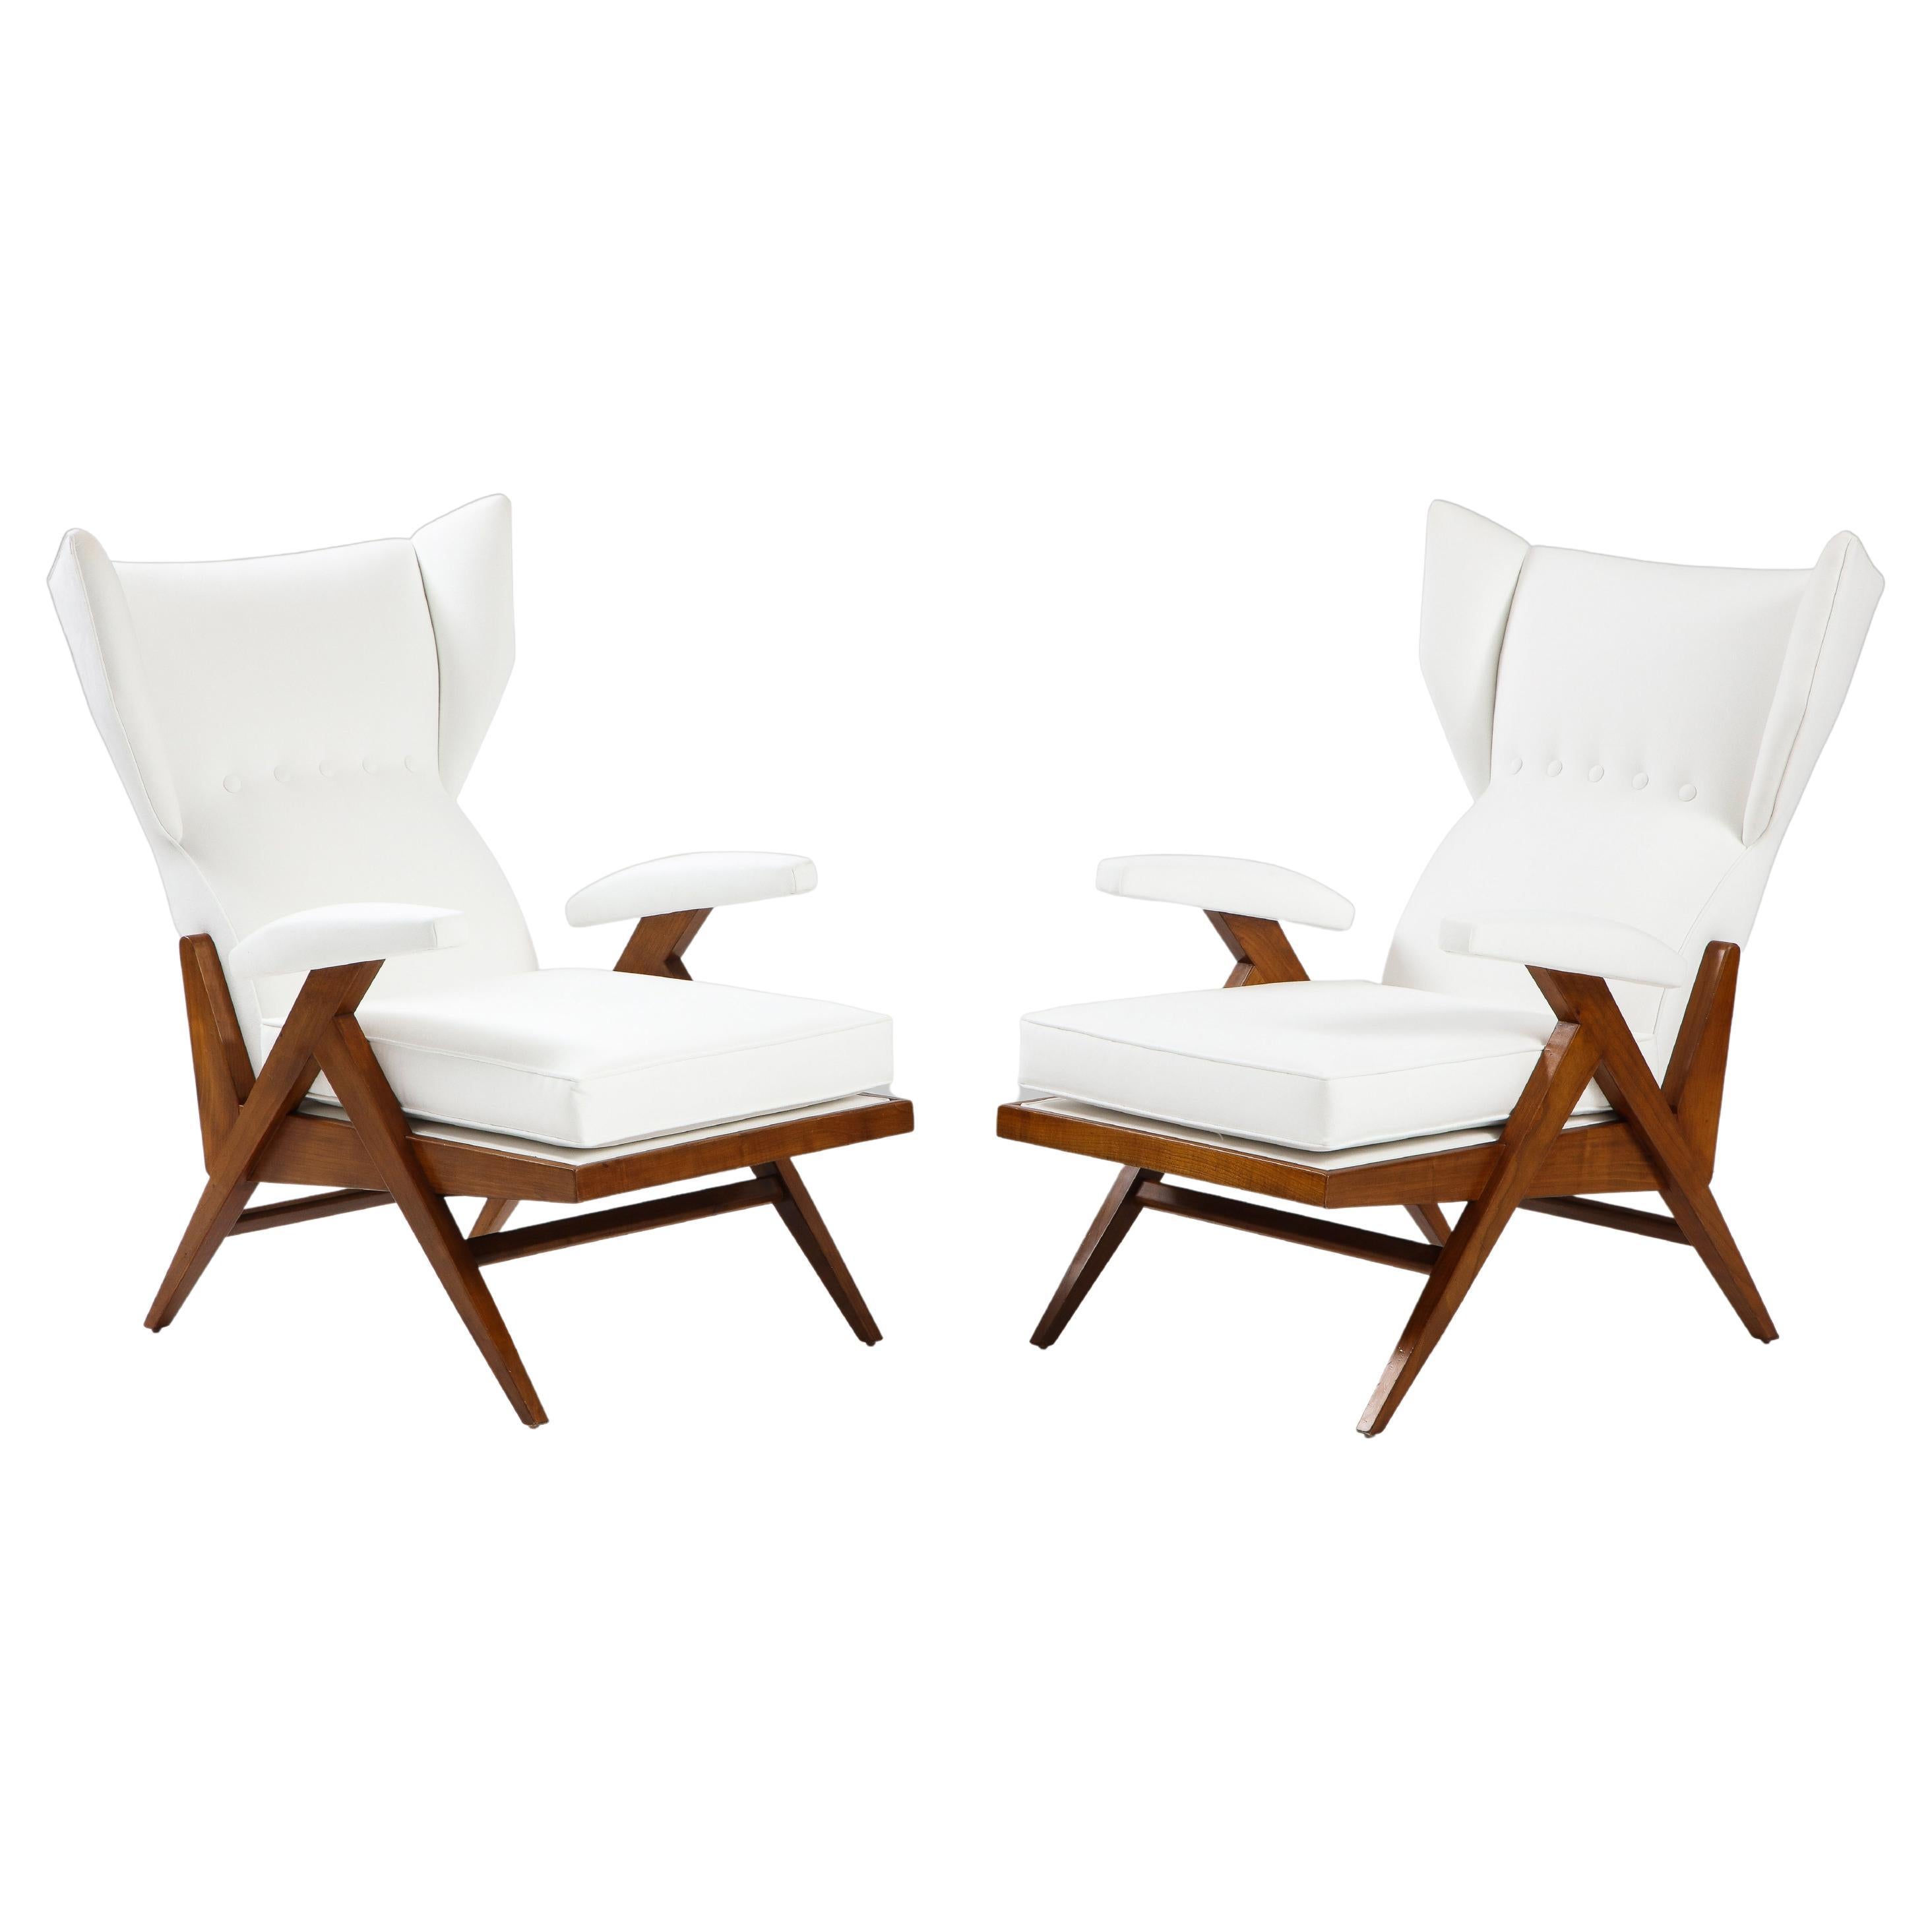 Renzo Franchi for Camerani Camea Pair of Cherry Lounge Chairs in White Sensuede